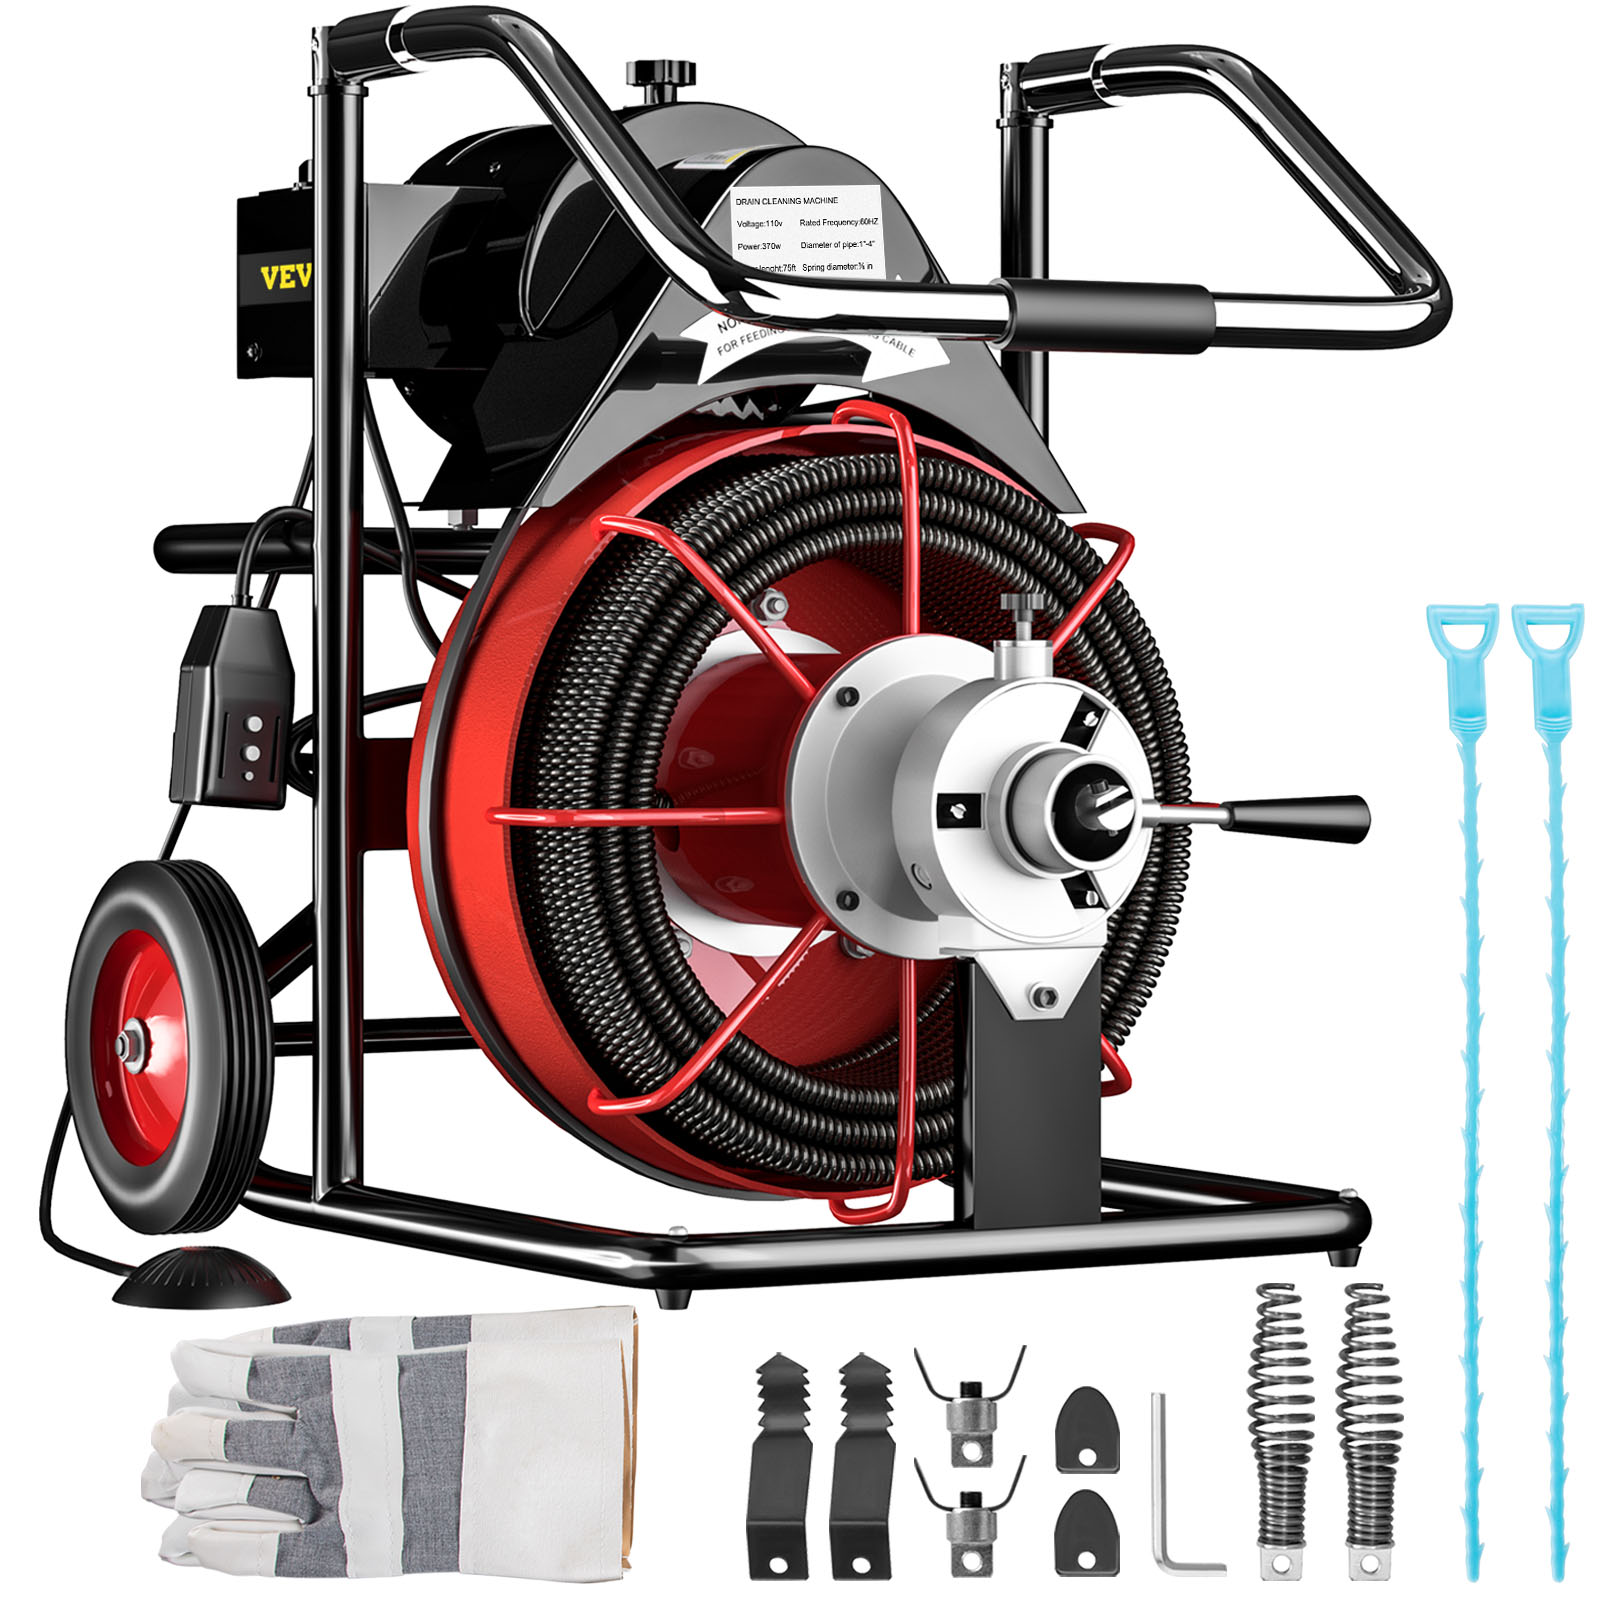 VEVOR 75' x 3/8 Drain Cleaning Machine Drum Auger Drain Cleaner 370W Plumbing Tools